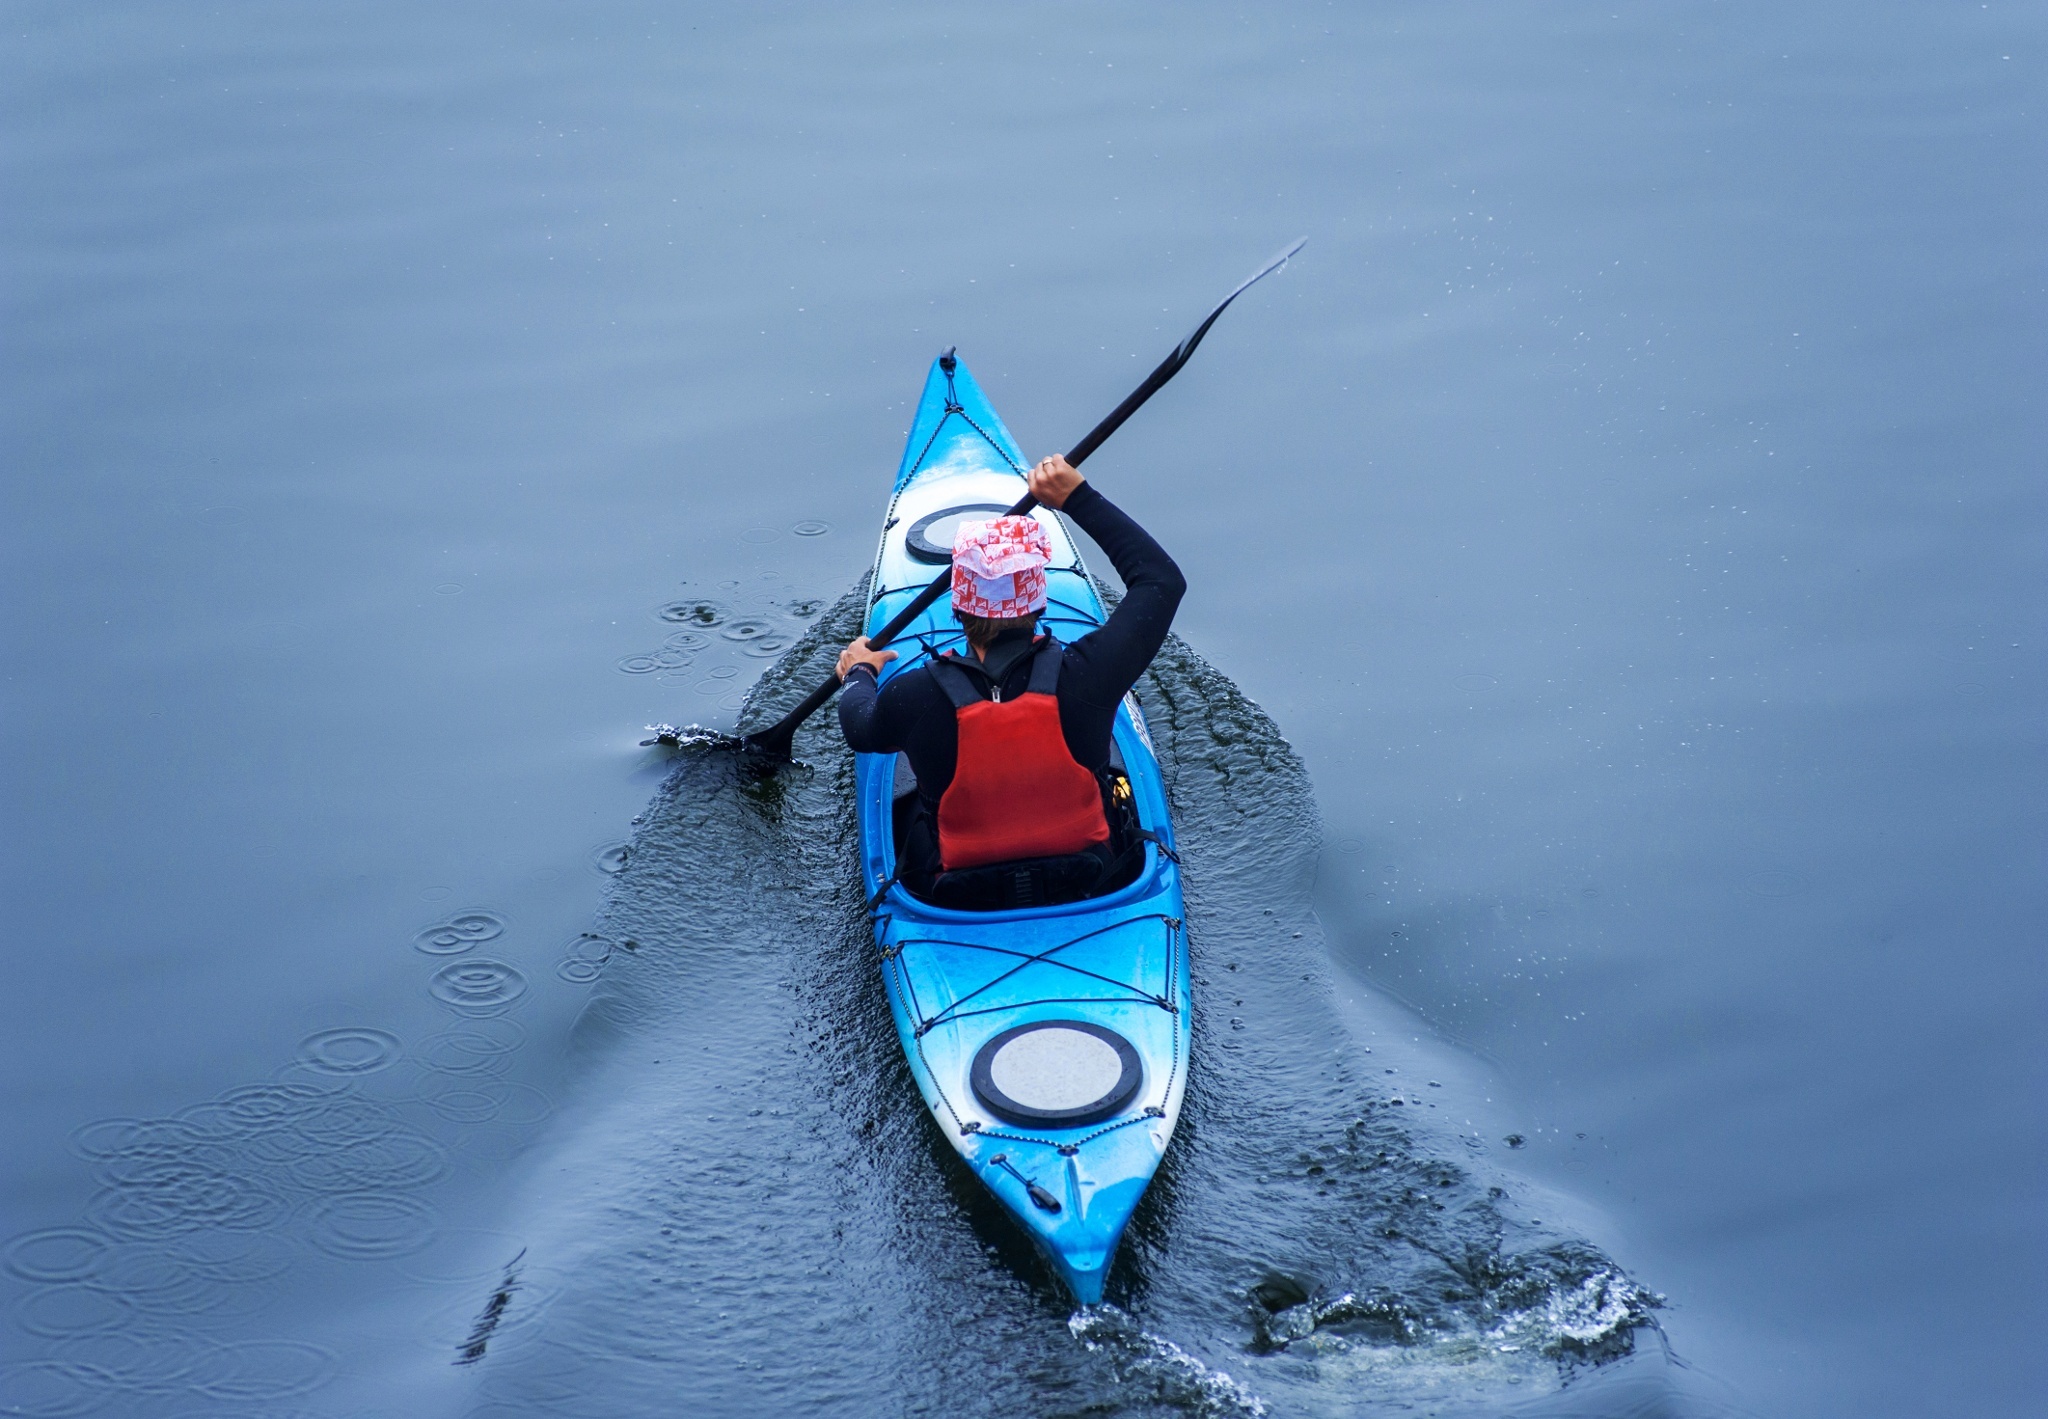 Kayaking: Kayaker uses a double-bladed paddle to navigate over the water, Active sport. 2050x1420 HD Wallpaper.